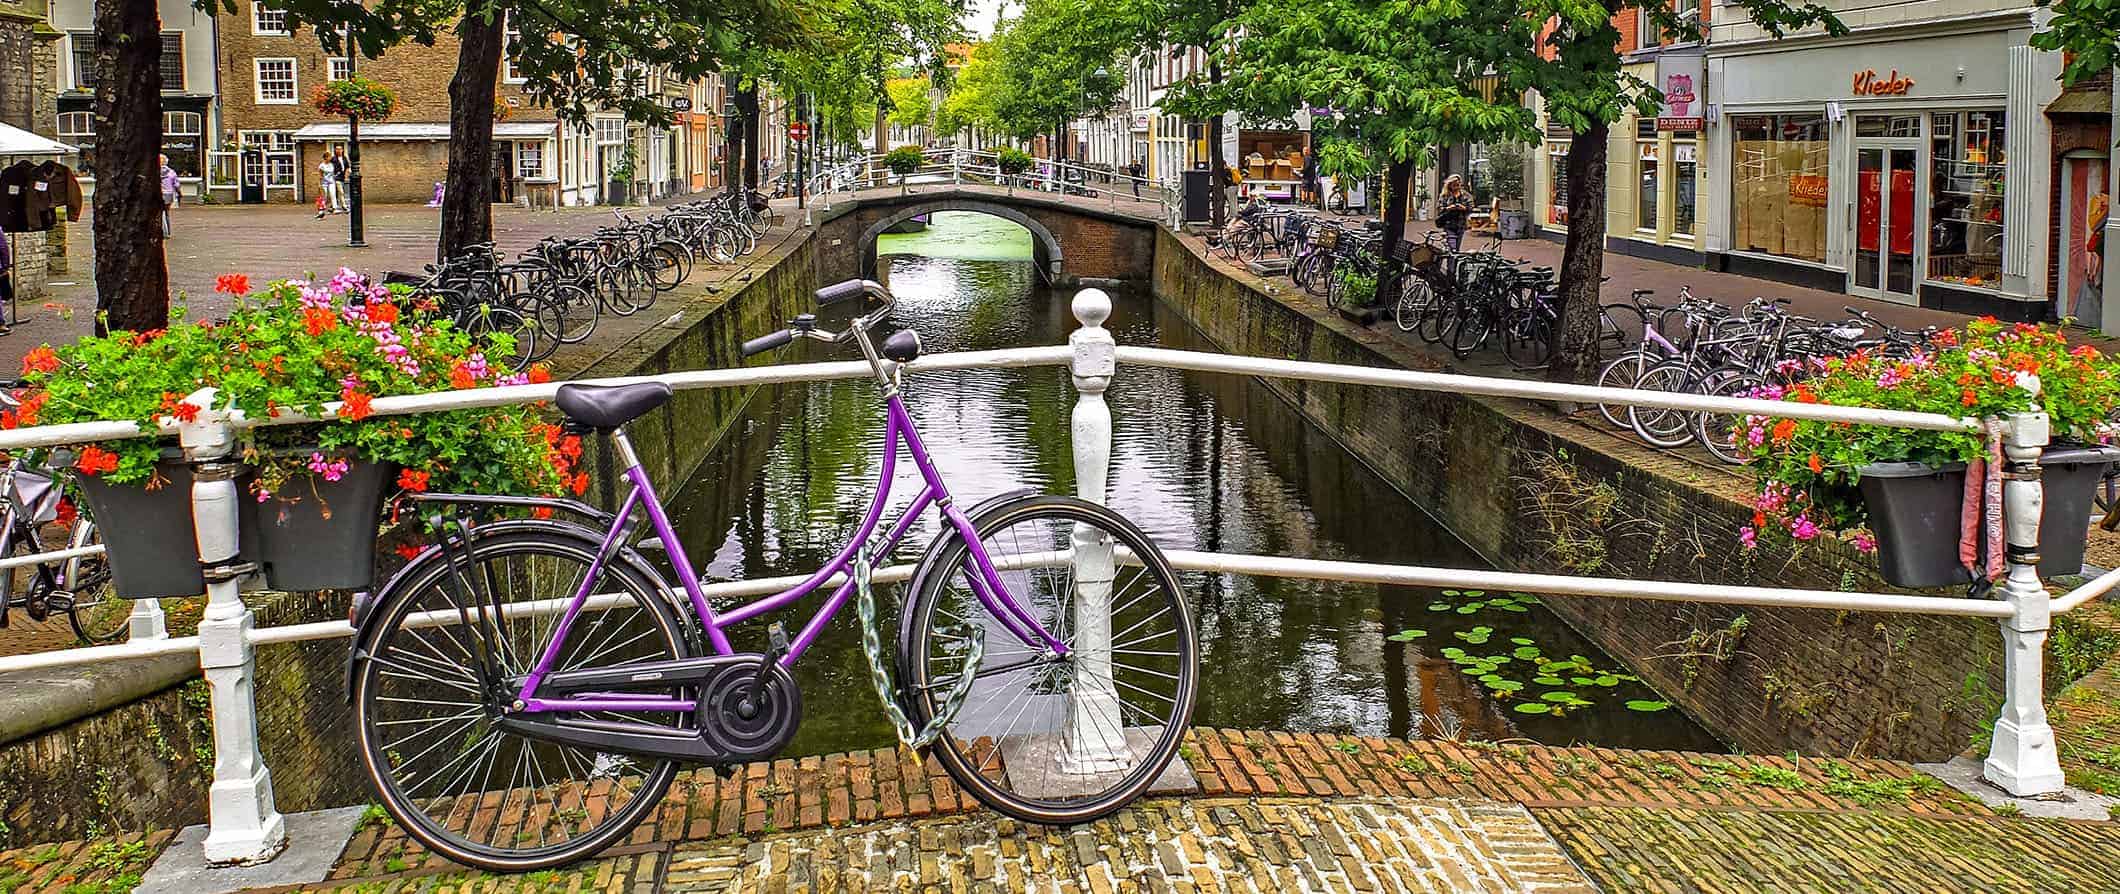 a view of a canal in the Netherlands with a bike leaning against a bridge